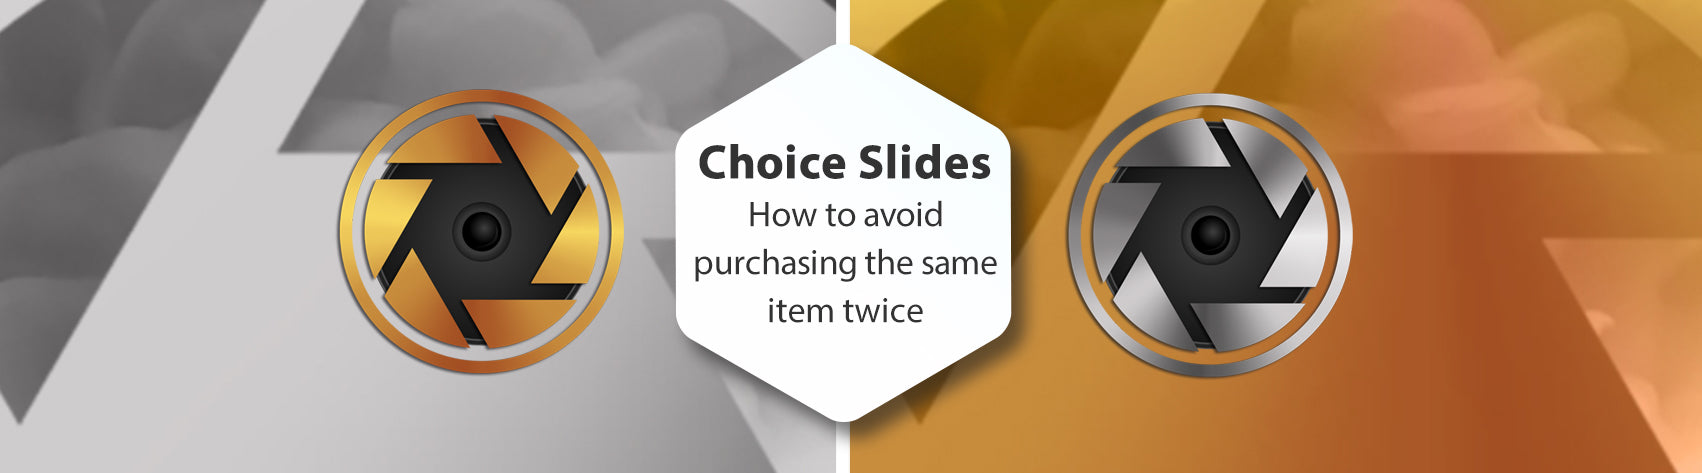 Avoiding Duplicate Purchases on Choice Slides